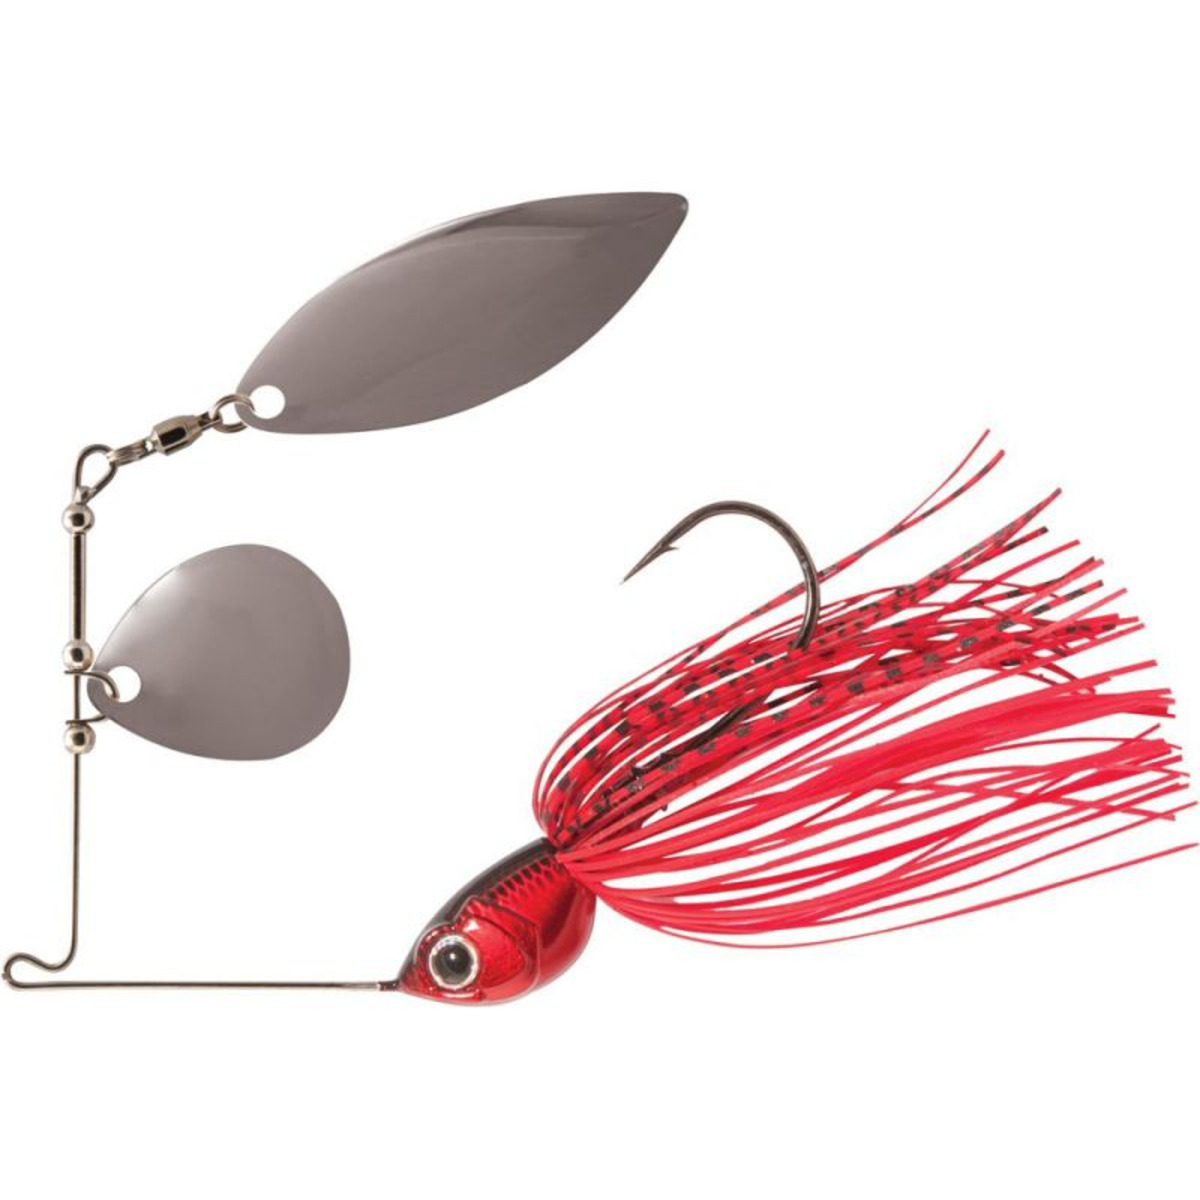 Rapture Sharp Spin Willow Colorado - 10.0 g - Red Hot